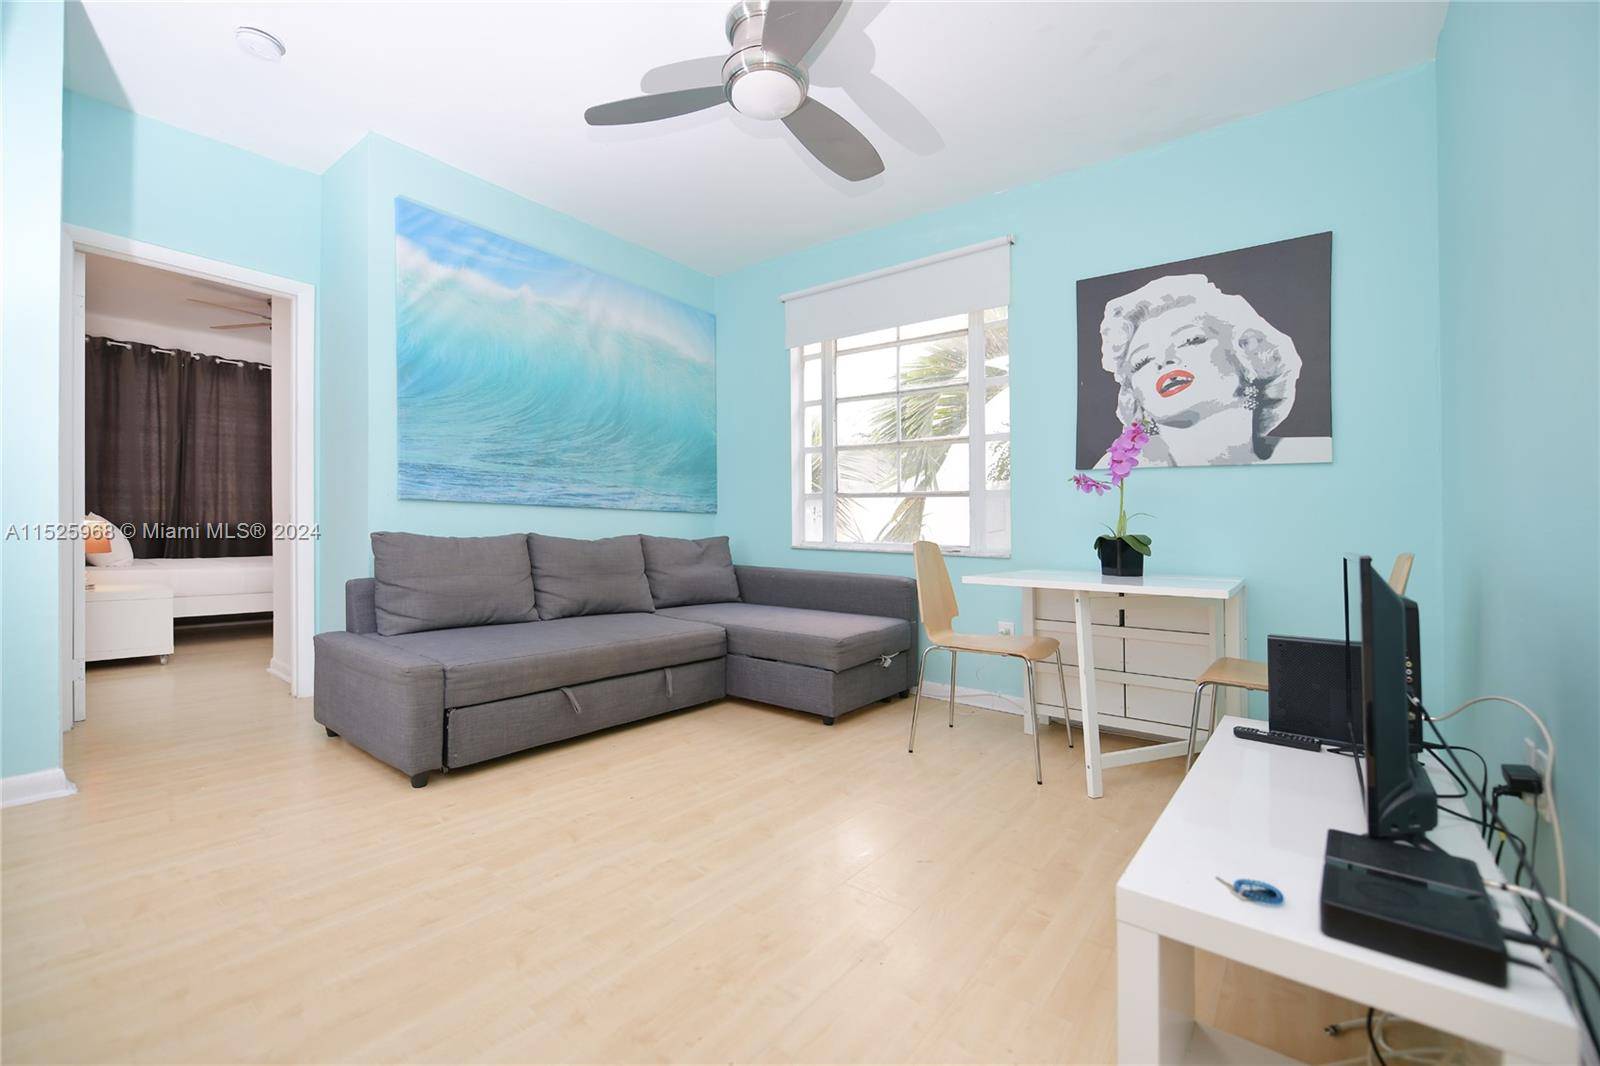 Amazing opportunity to own an income producing property in Miami Beach.